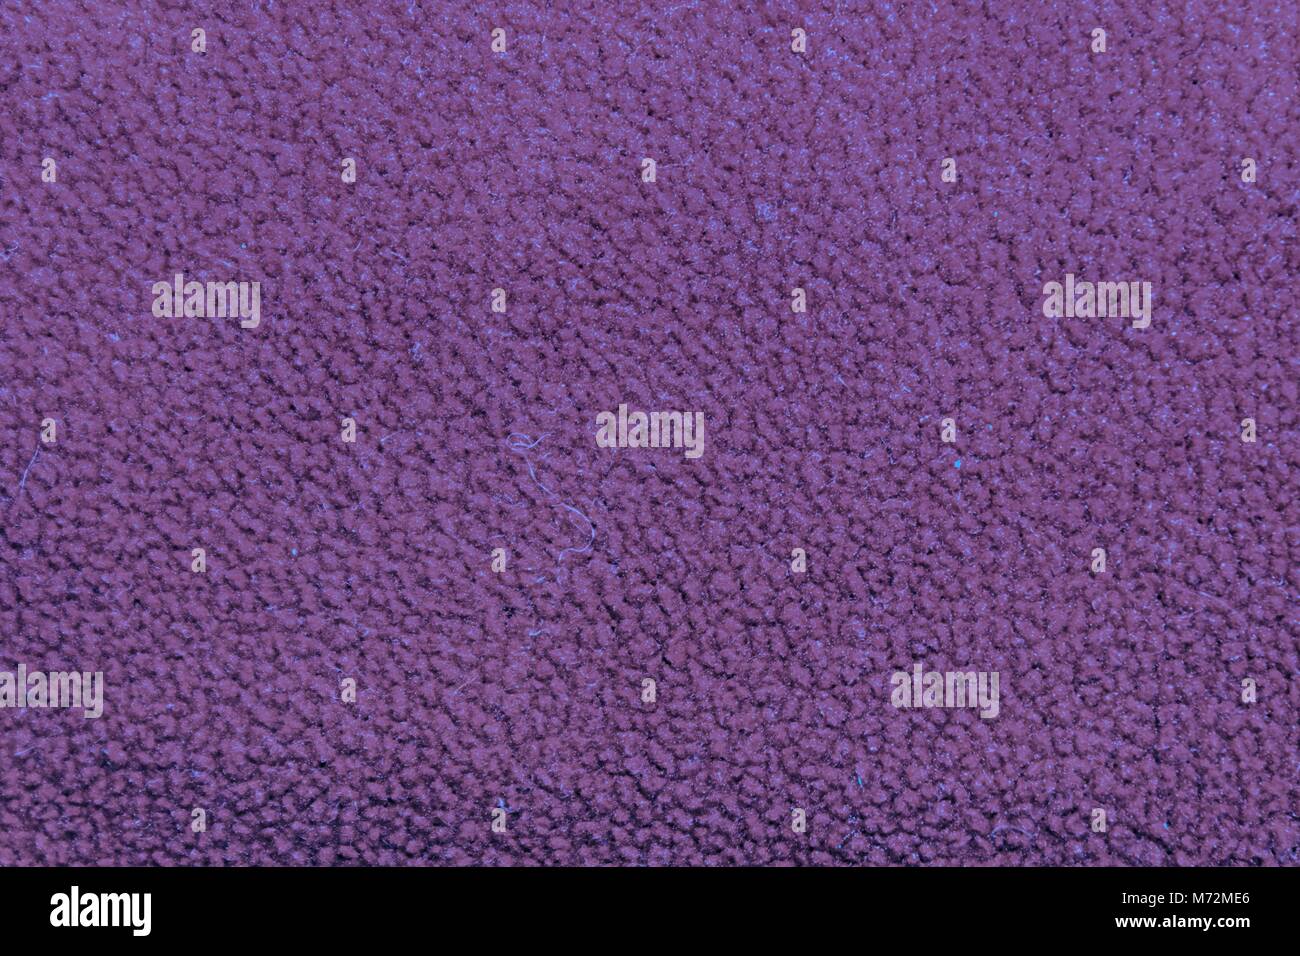 Fabric chiffon lilac colored texture or background. Stock Photo